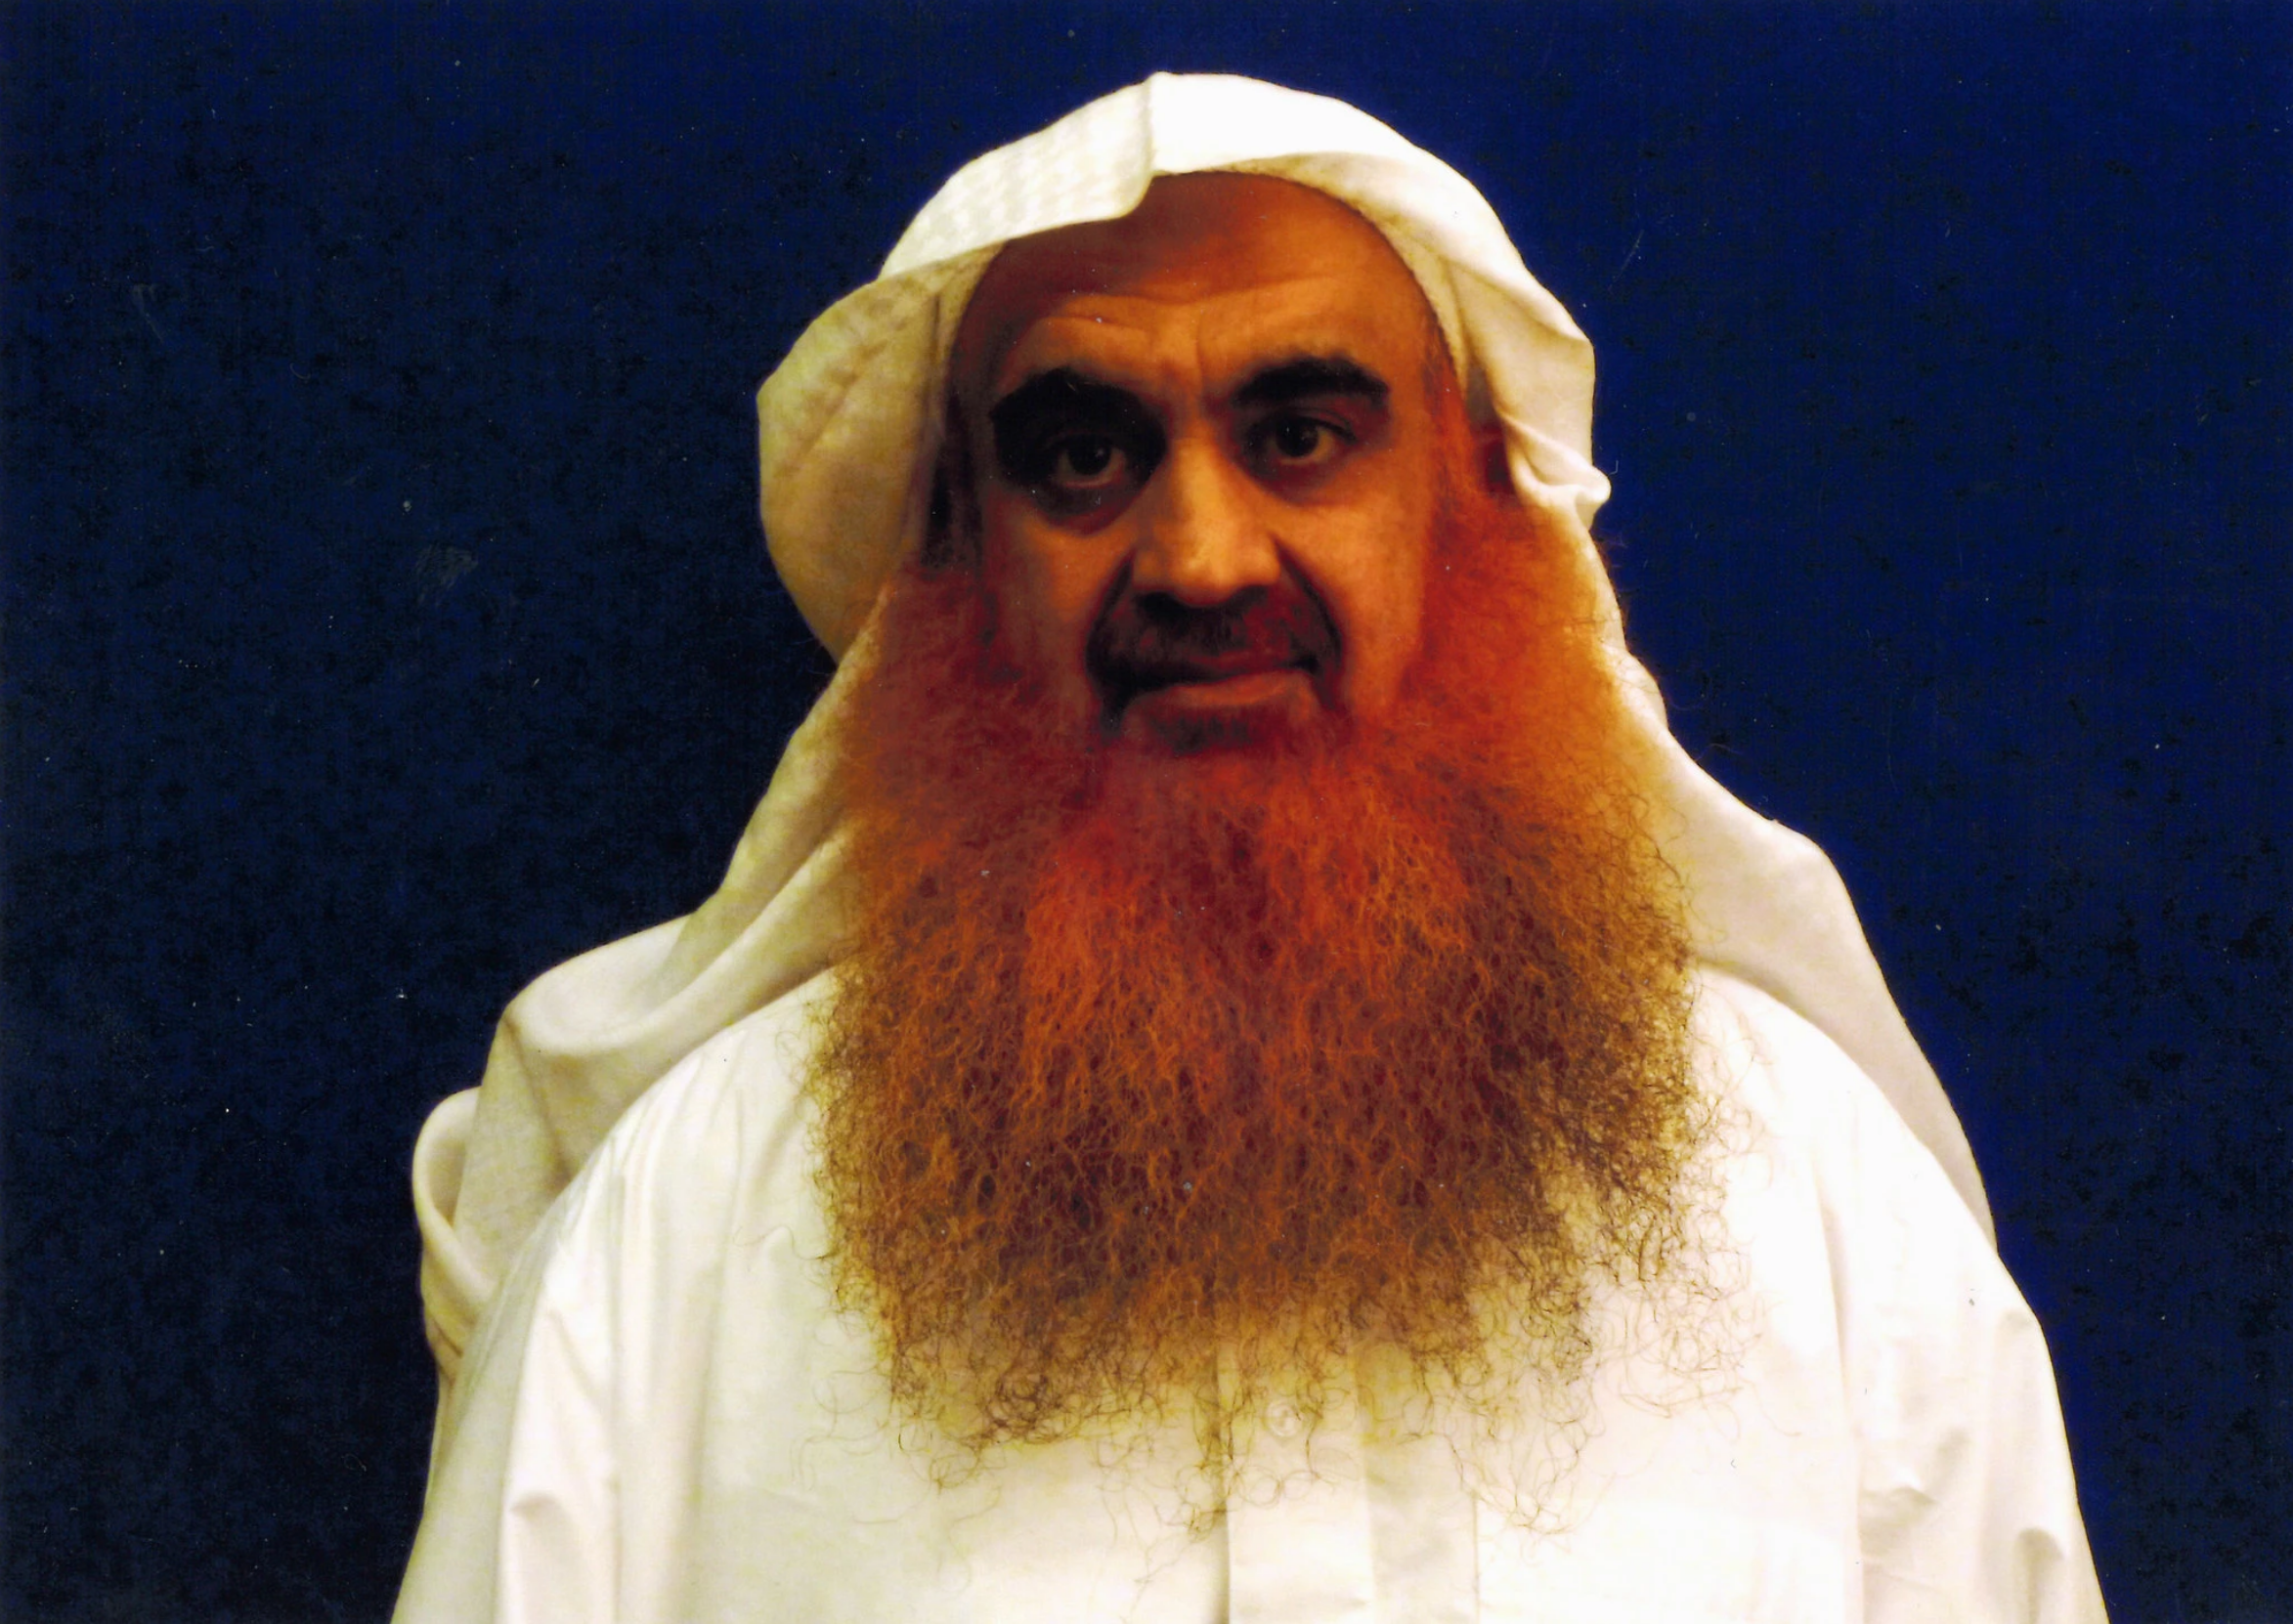 Defense lawyers for Khalid Shaikh Mohammed had asked the trial judge to let him speak with his lead lawyer over a prison-monitored telephone. Image courtesy The New York Times.